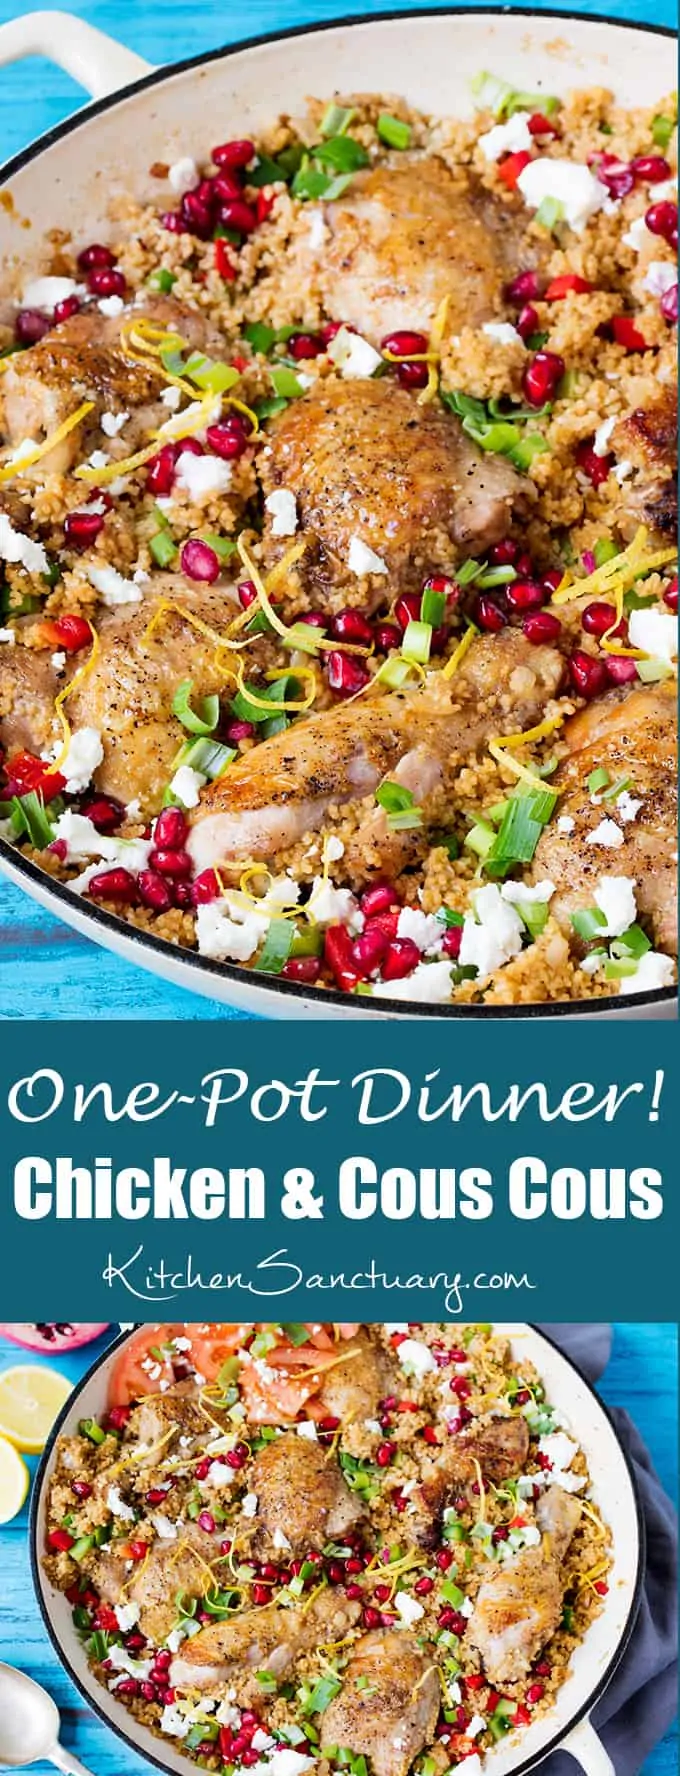 One-Pot Chicken and Cous Cous with feta - enjoy it hot or cold!